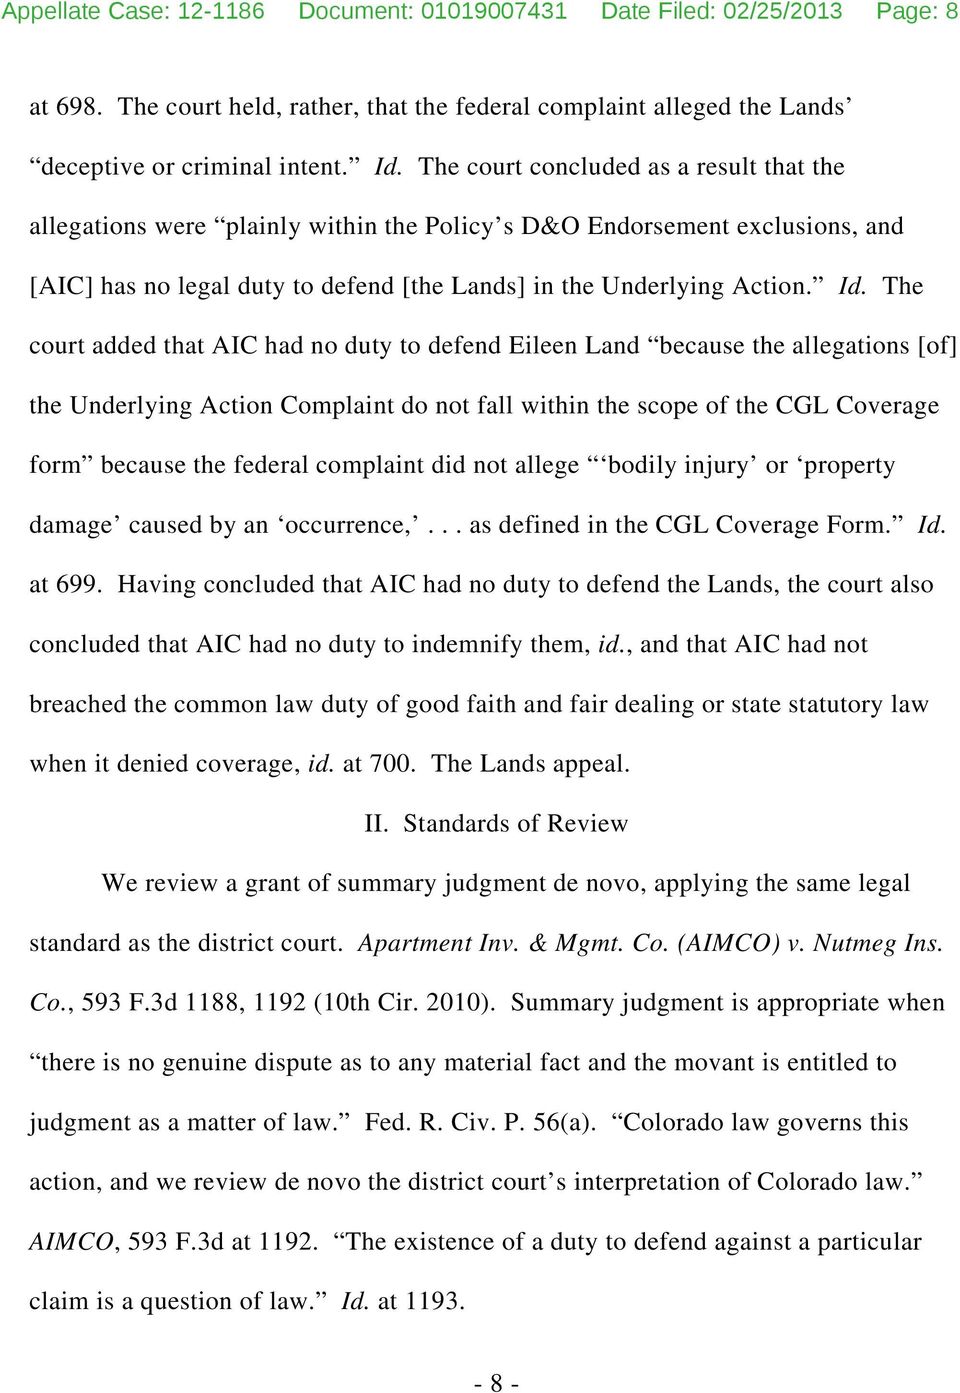 The court added that AIC had no duty to defend Eileen Land because the allegations [of] the Underlying Action Complaint do not fall within the scope of the CGL Coverage form because the federal